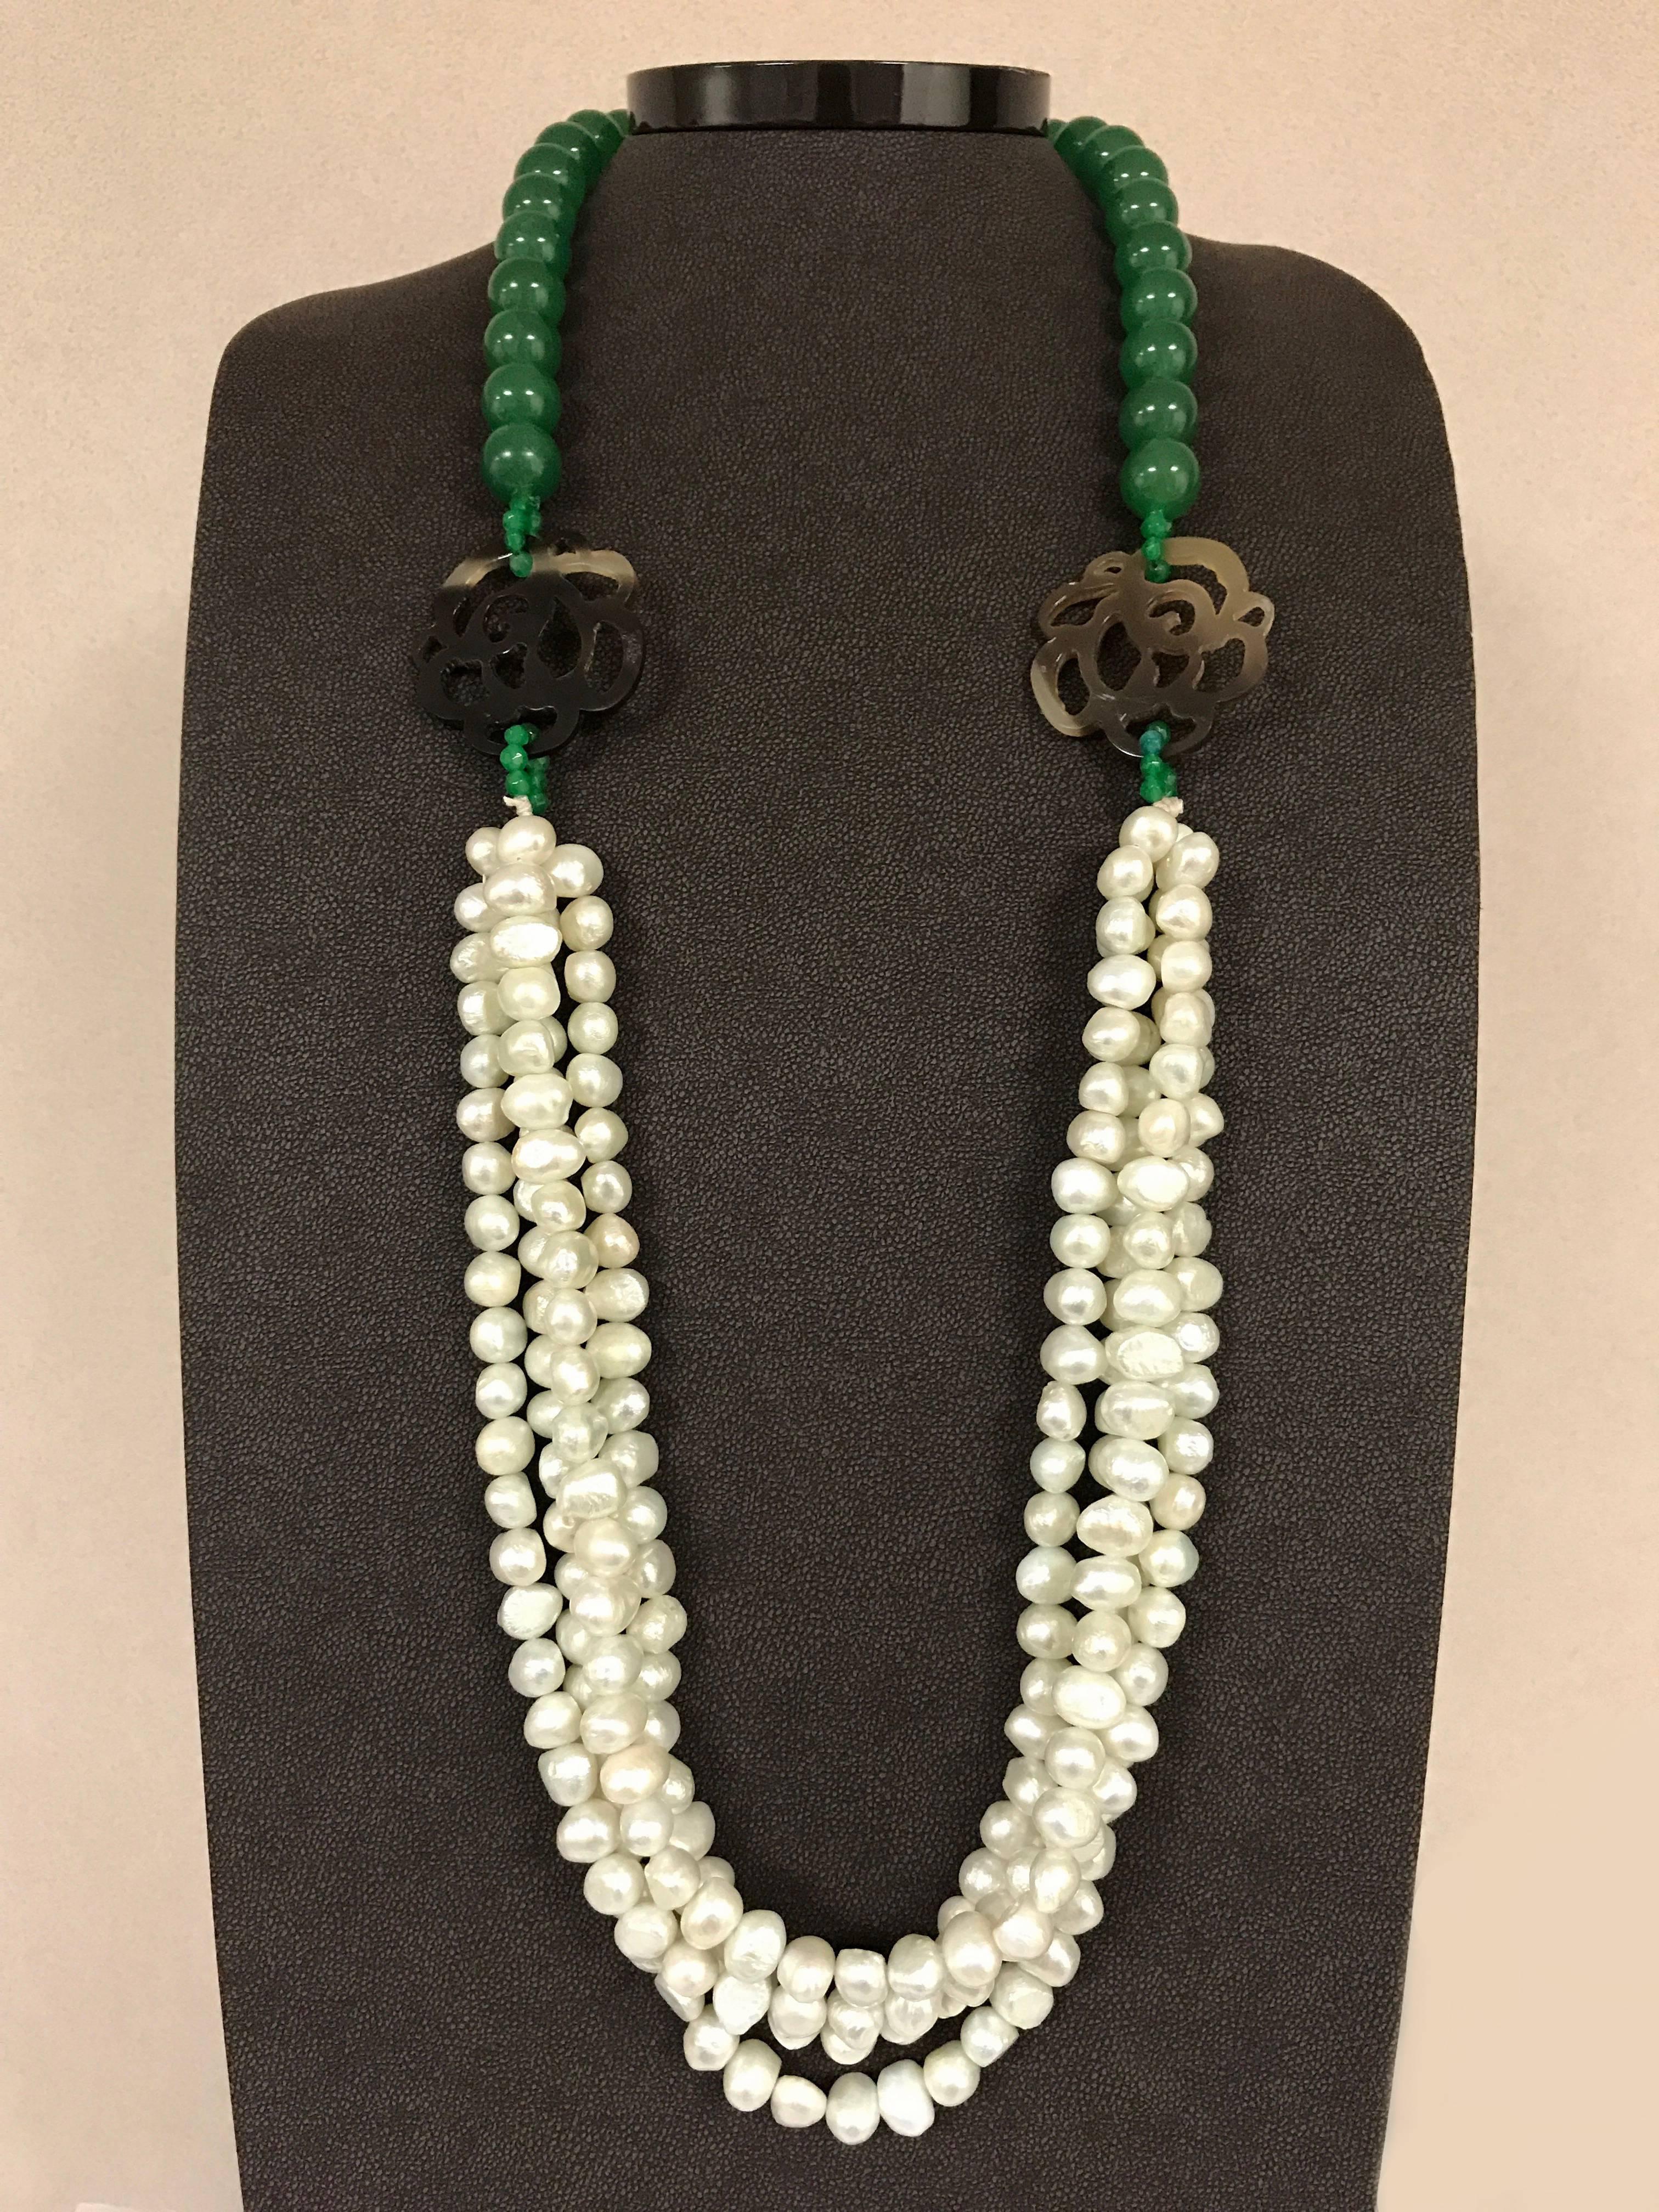 Baroque Pearls and Green Pearls Necklace.
Baroque Pearls 
Green Pearls 

